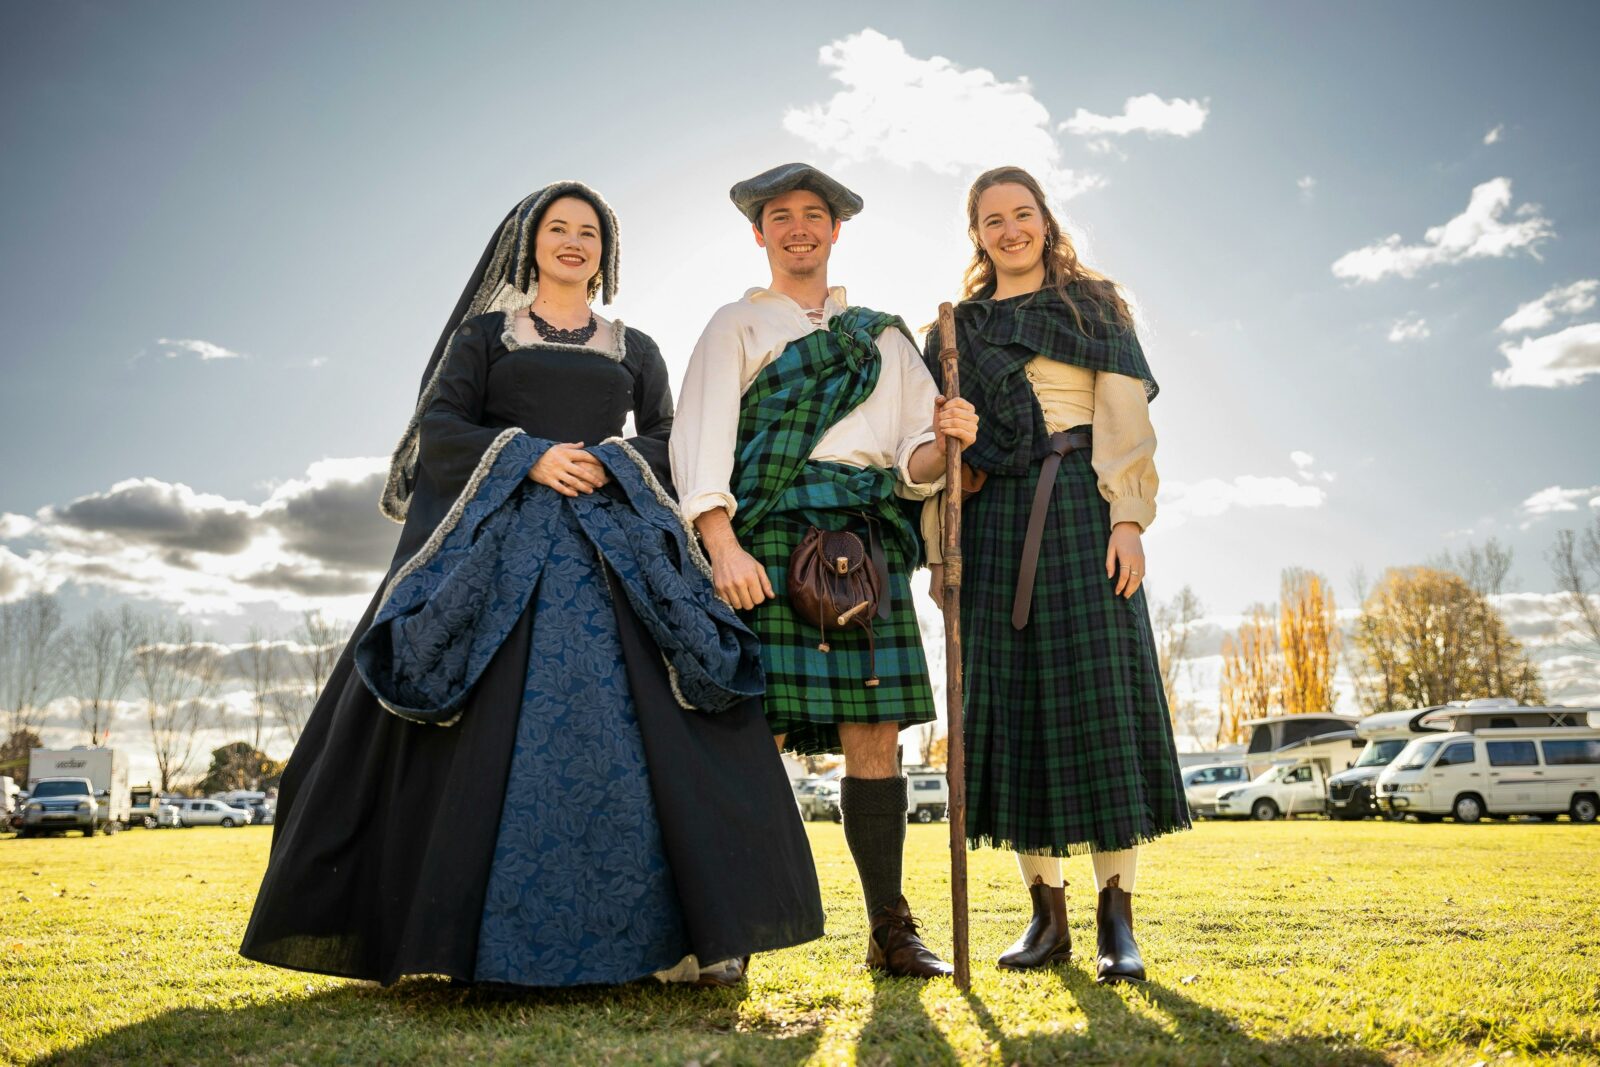 Three festival attendees dressed in traditional Celtic fashions